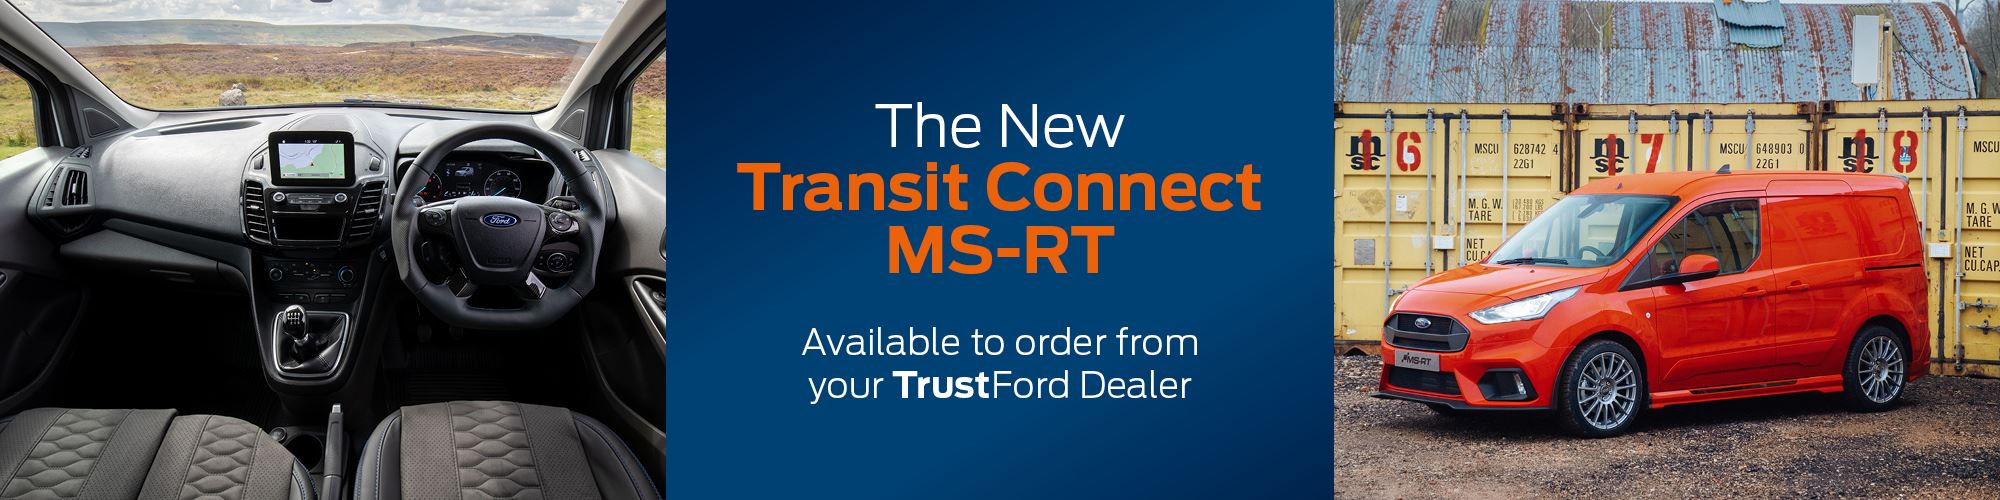 New Transit Connect MS-RT